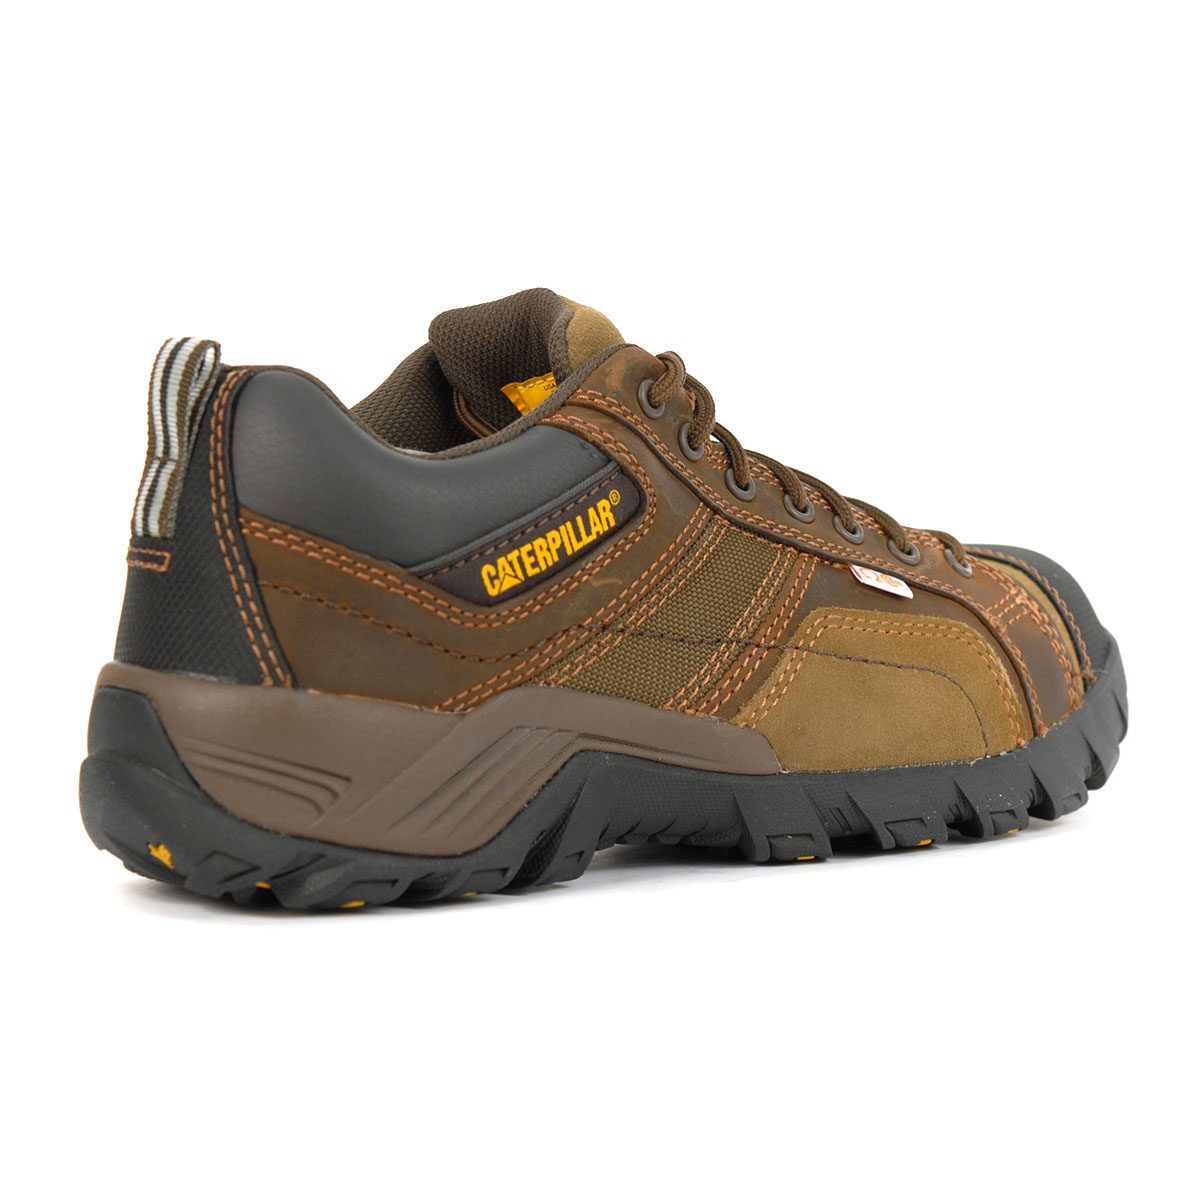 COD ❏✿ The Multitude Shop31tht9 Caterpillar Argon Safety Boots Septi Shoes  Iron Toe Project/Outdoor Mountain Shoes | Lazada PH